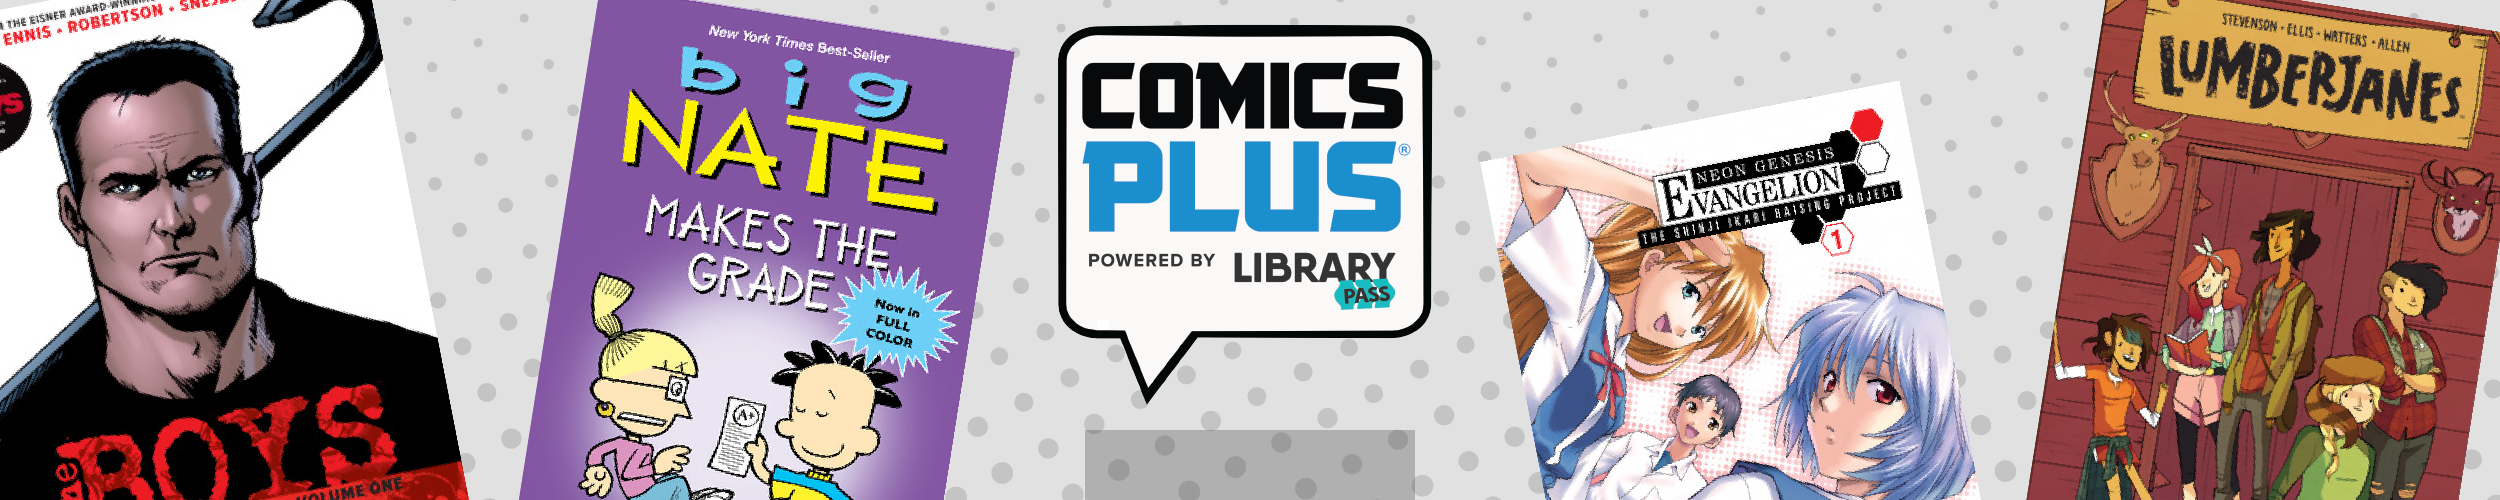 Comics Plus slide with comic book covers and logo